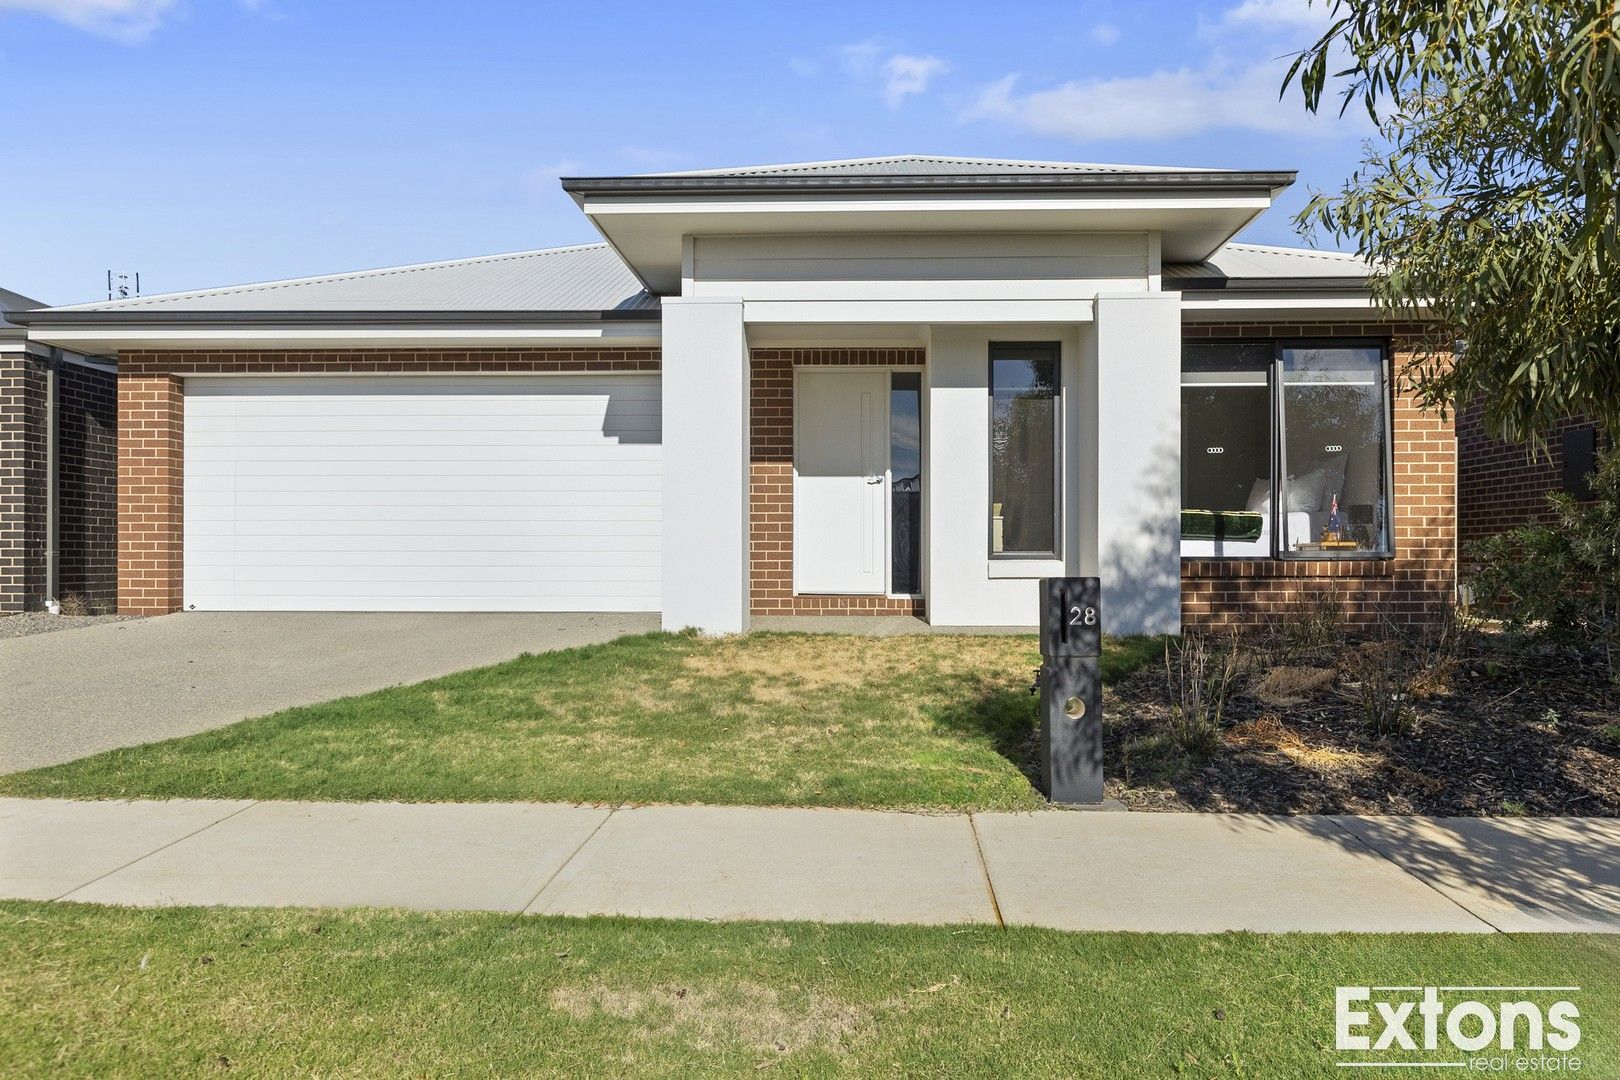 4 bedrooms House in 28 Oasis Crescent YARRAWONGA VIC, 3730